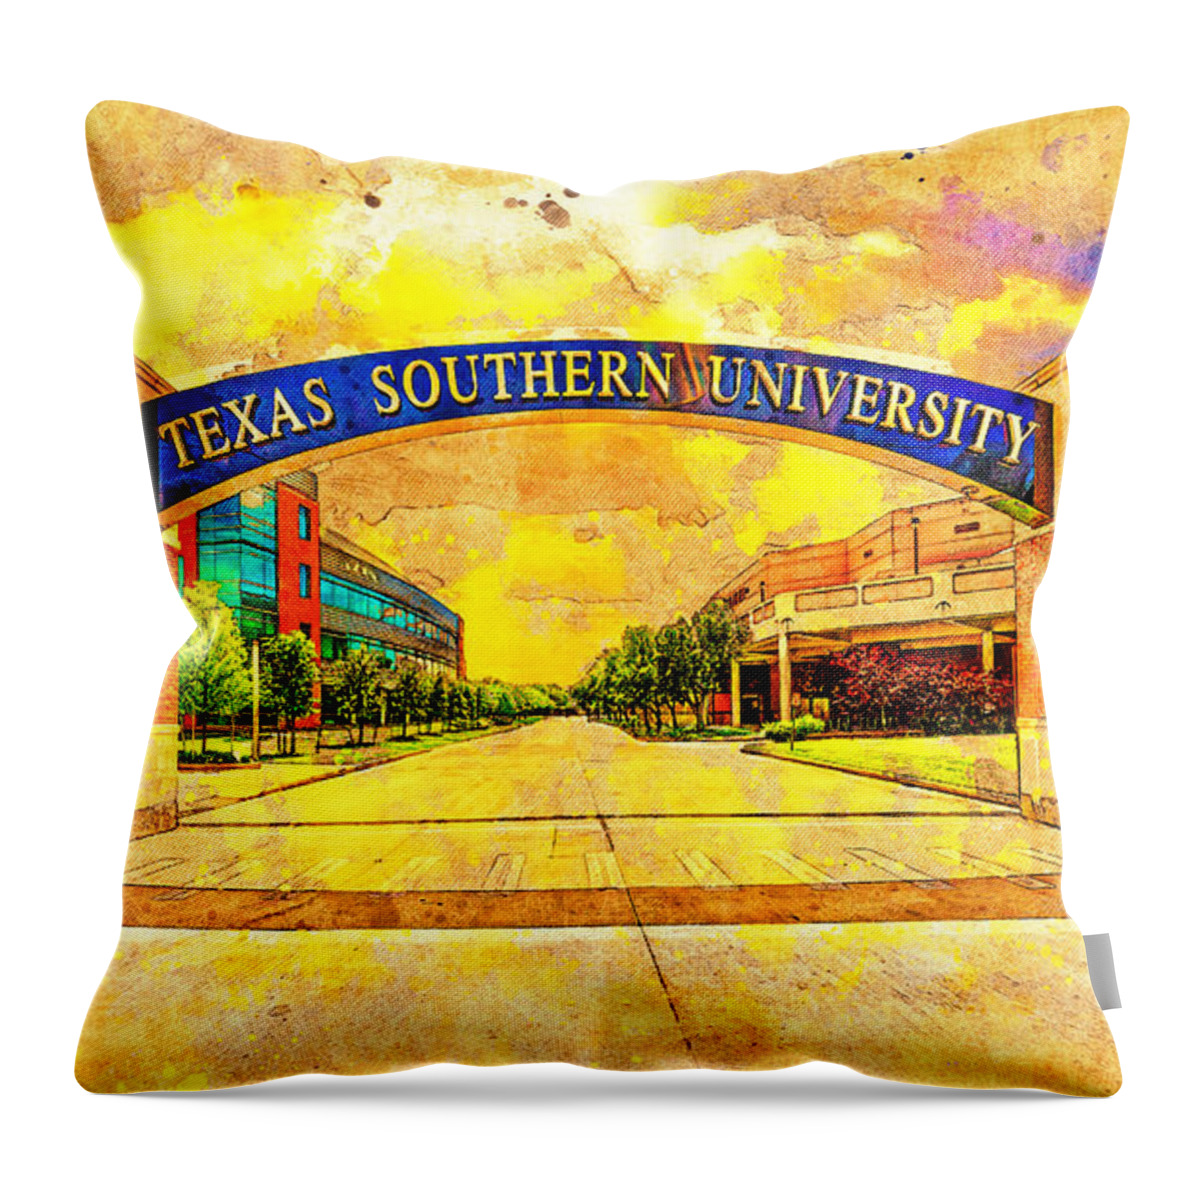 Texas Southern University Throw Pillow featuring the digital art Texas Southern University in Houston, Texas - digital painting by Nicko Prints